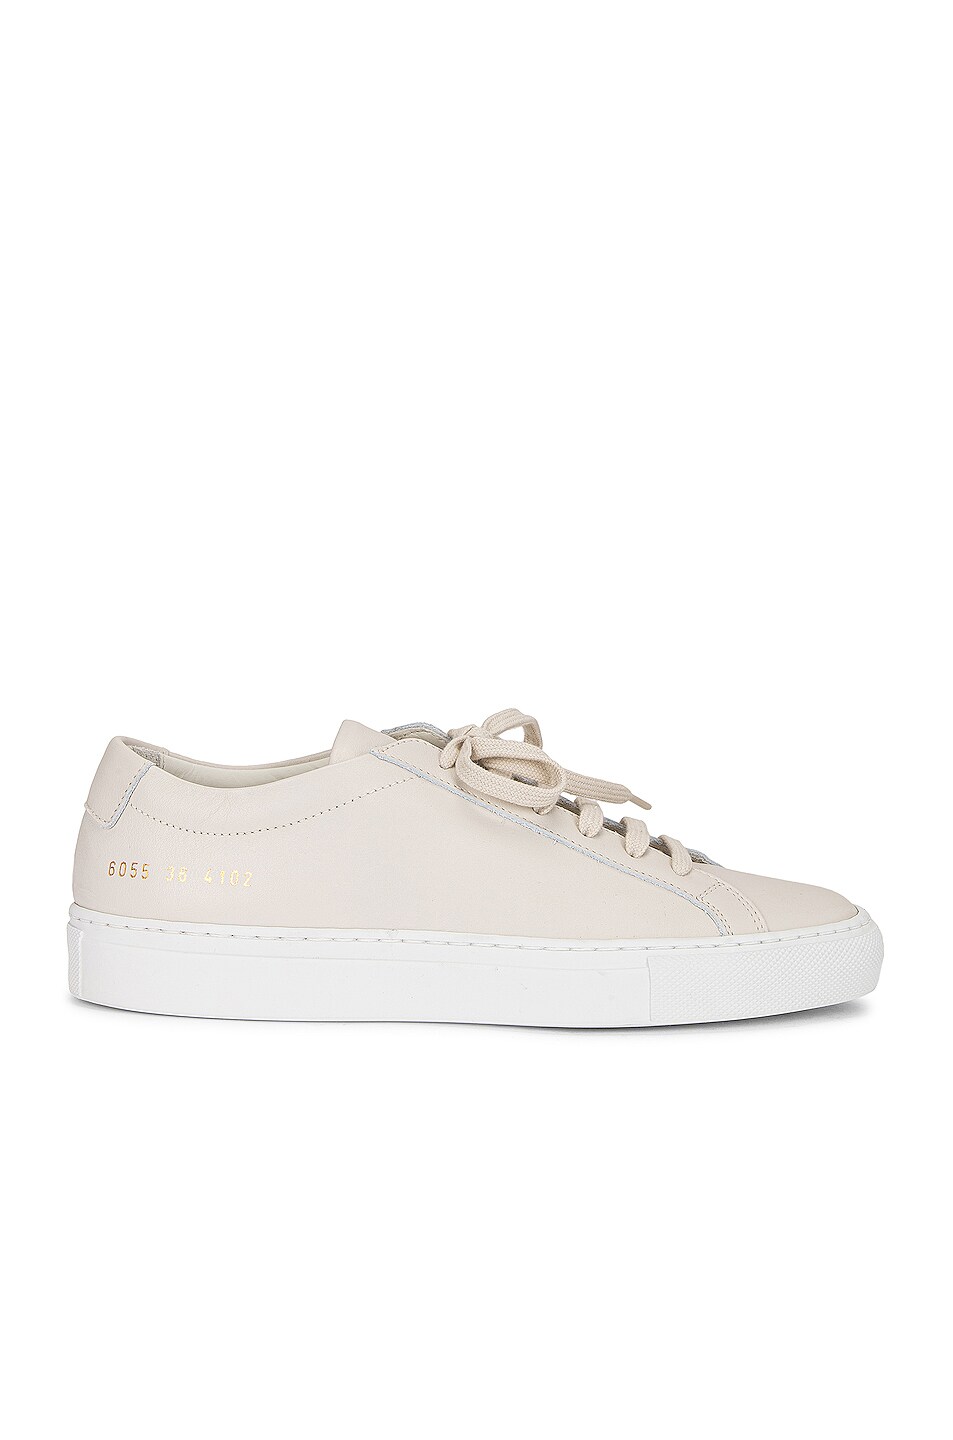 Image 1 of Common Projects Achilles White Sole Sneaker in Off White